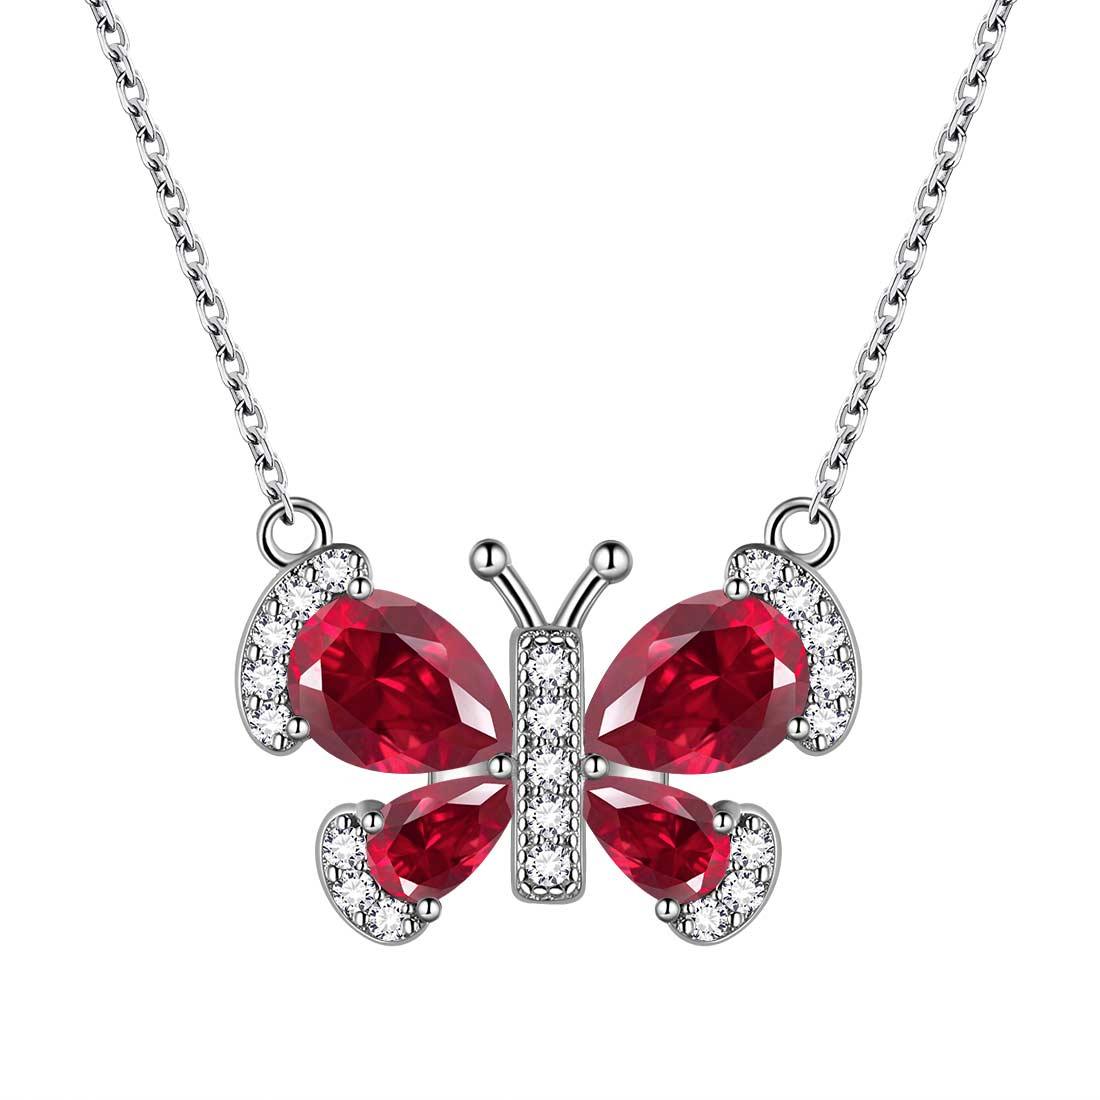 Butterfly Necklace Birthstone July Ruby Pendant - Necklaces - Aurora Tears